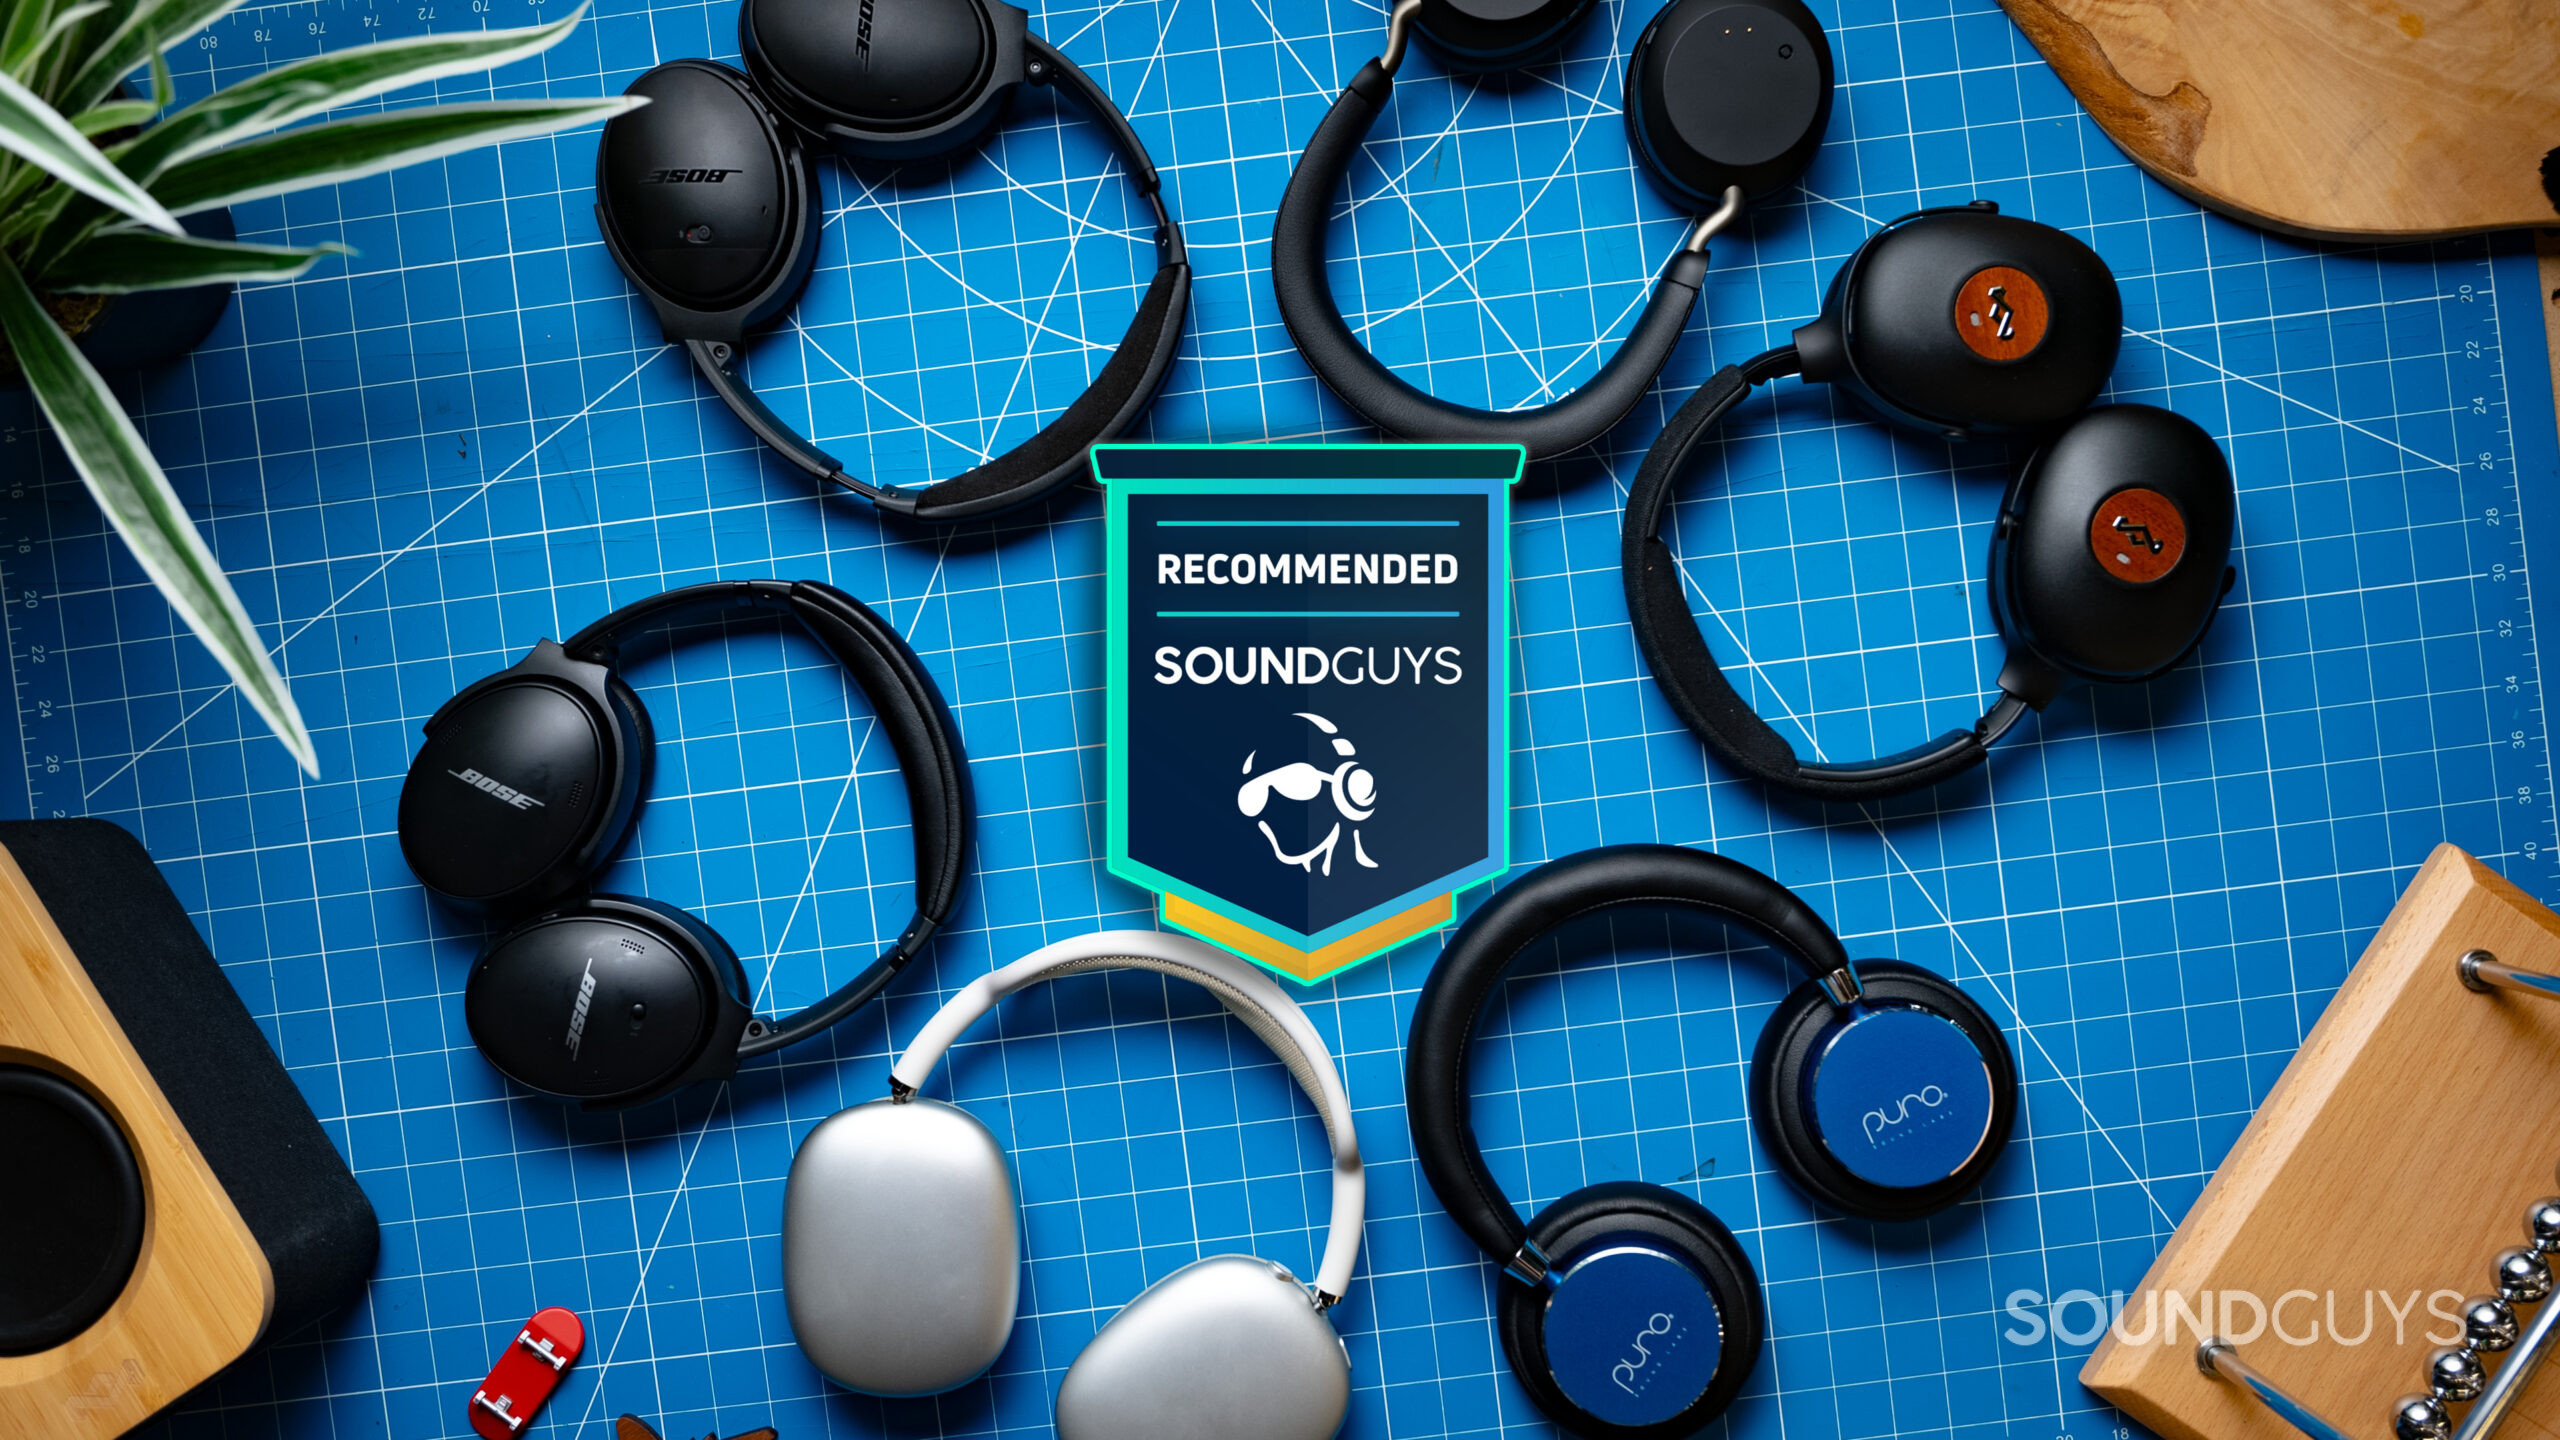 Six of the best headphones surrounding the SoundGuys recommended badge.